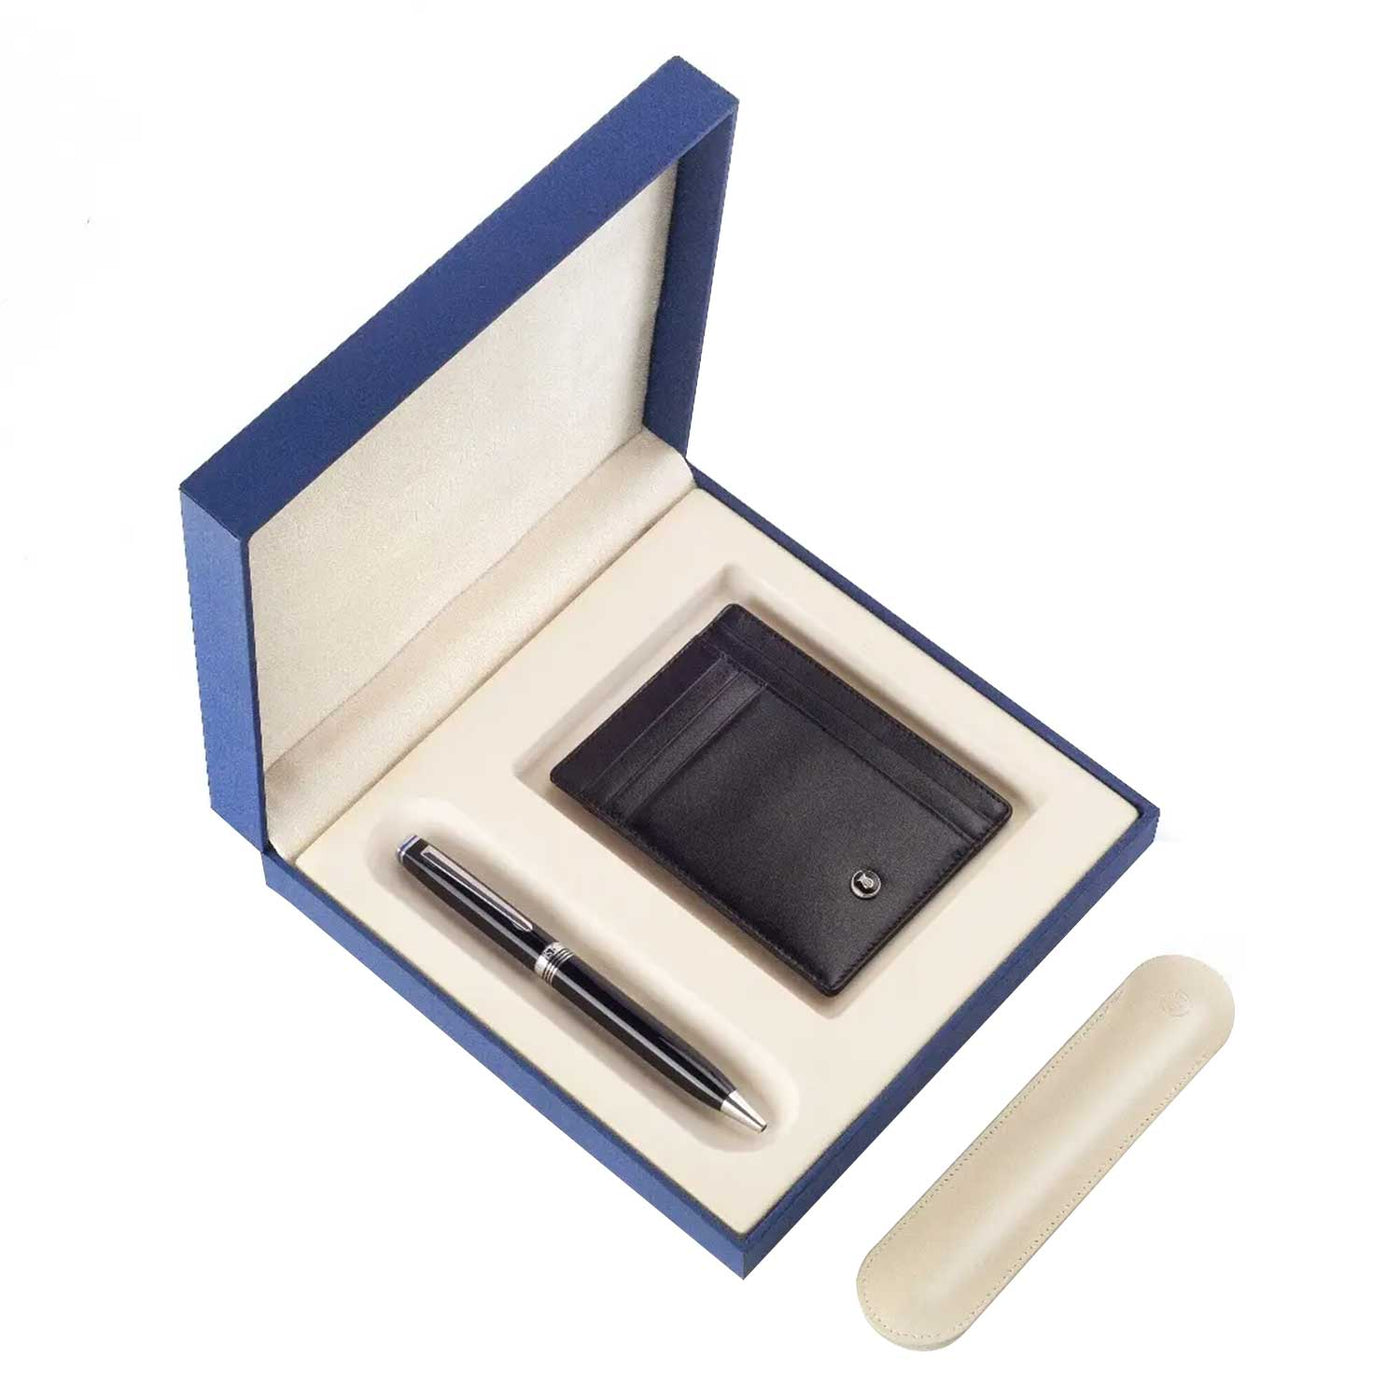 Lapis Bard Gift Set - Contemporary Black Ball Pen with Mayfair Credit Card Holder 1